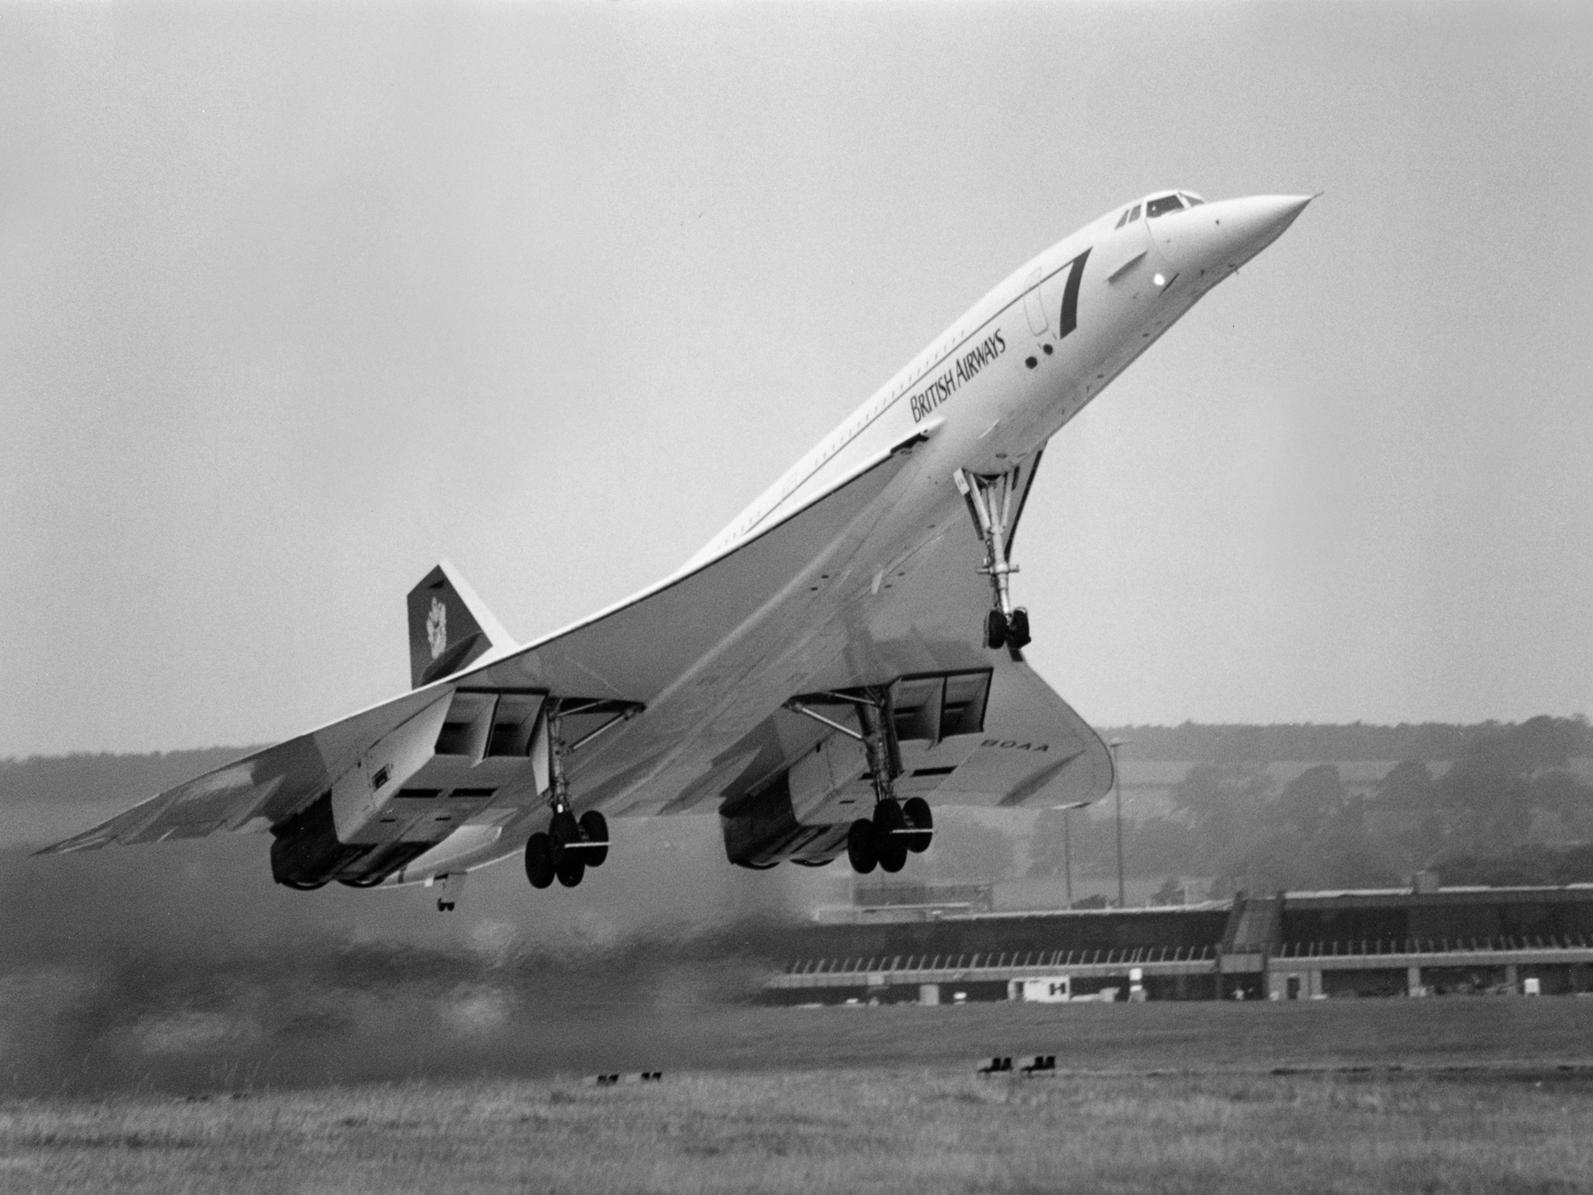 This photo taken from the side of the runway as British Airways G-BOAA took off in 1997.